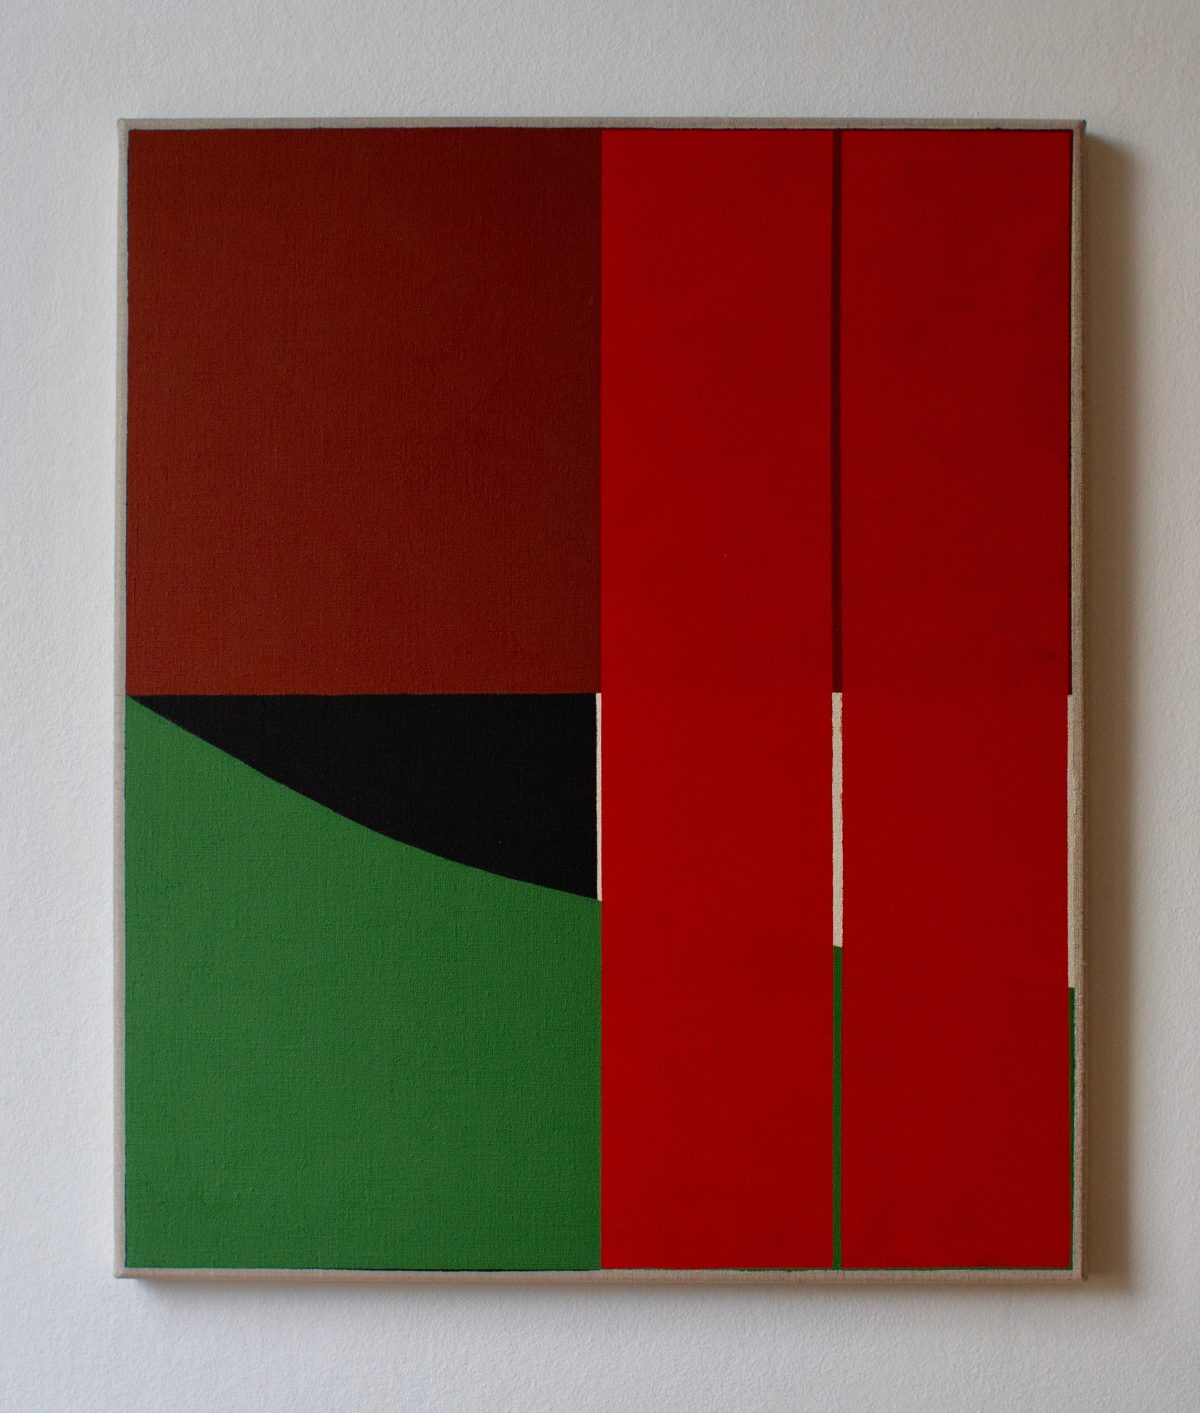 image shows an abstract painting by artist Richard Bell